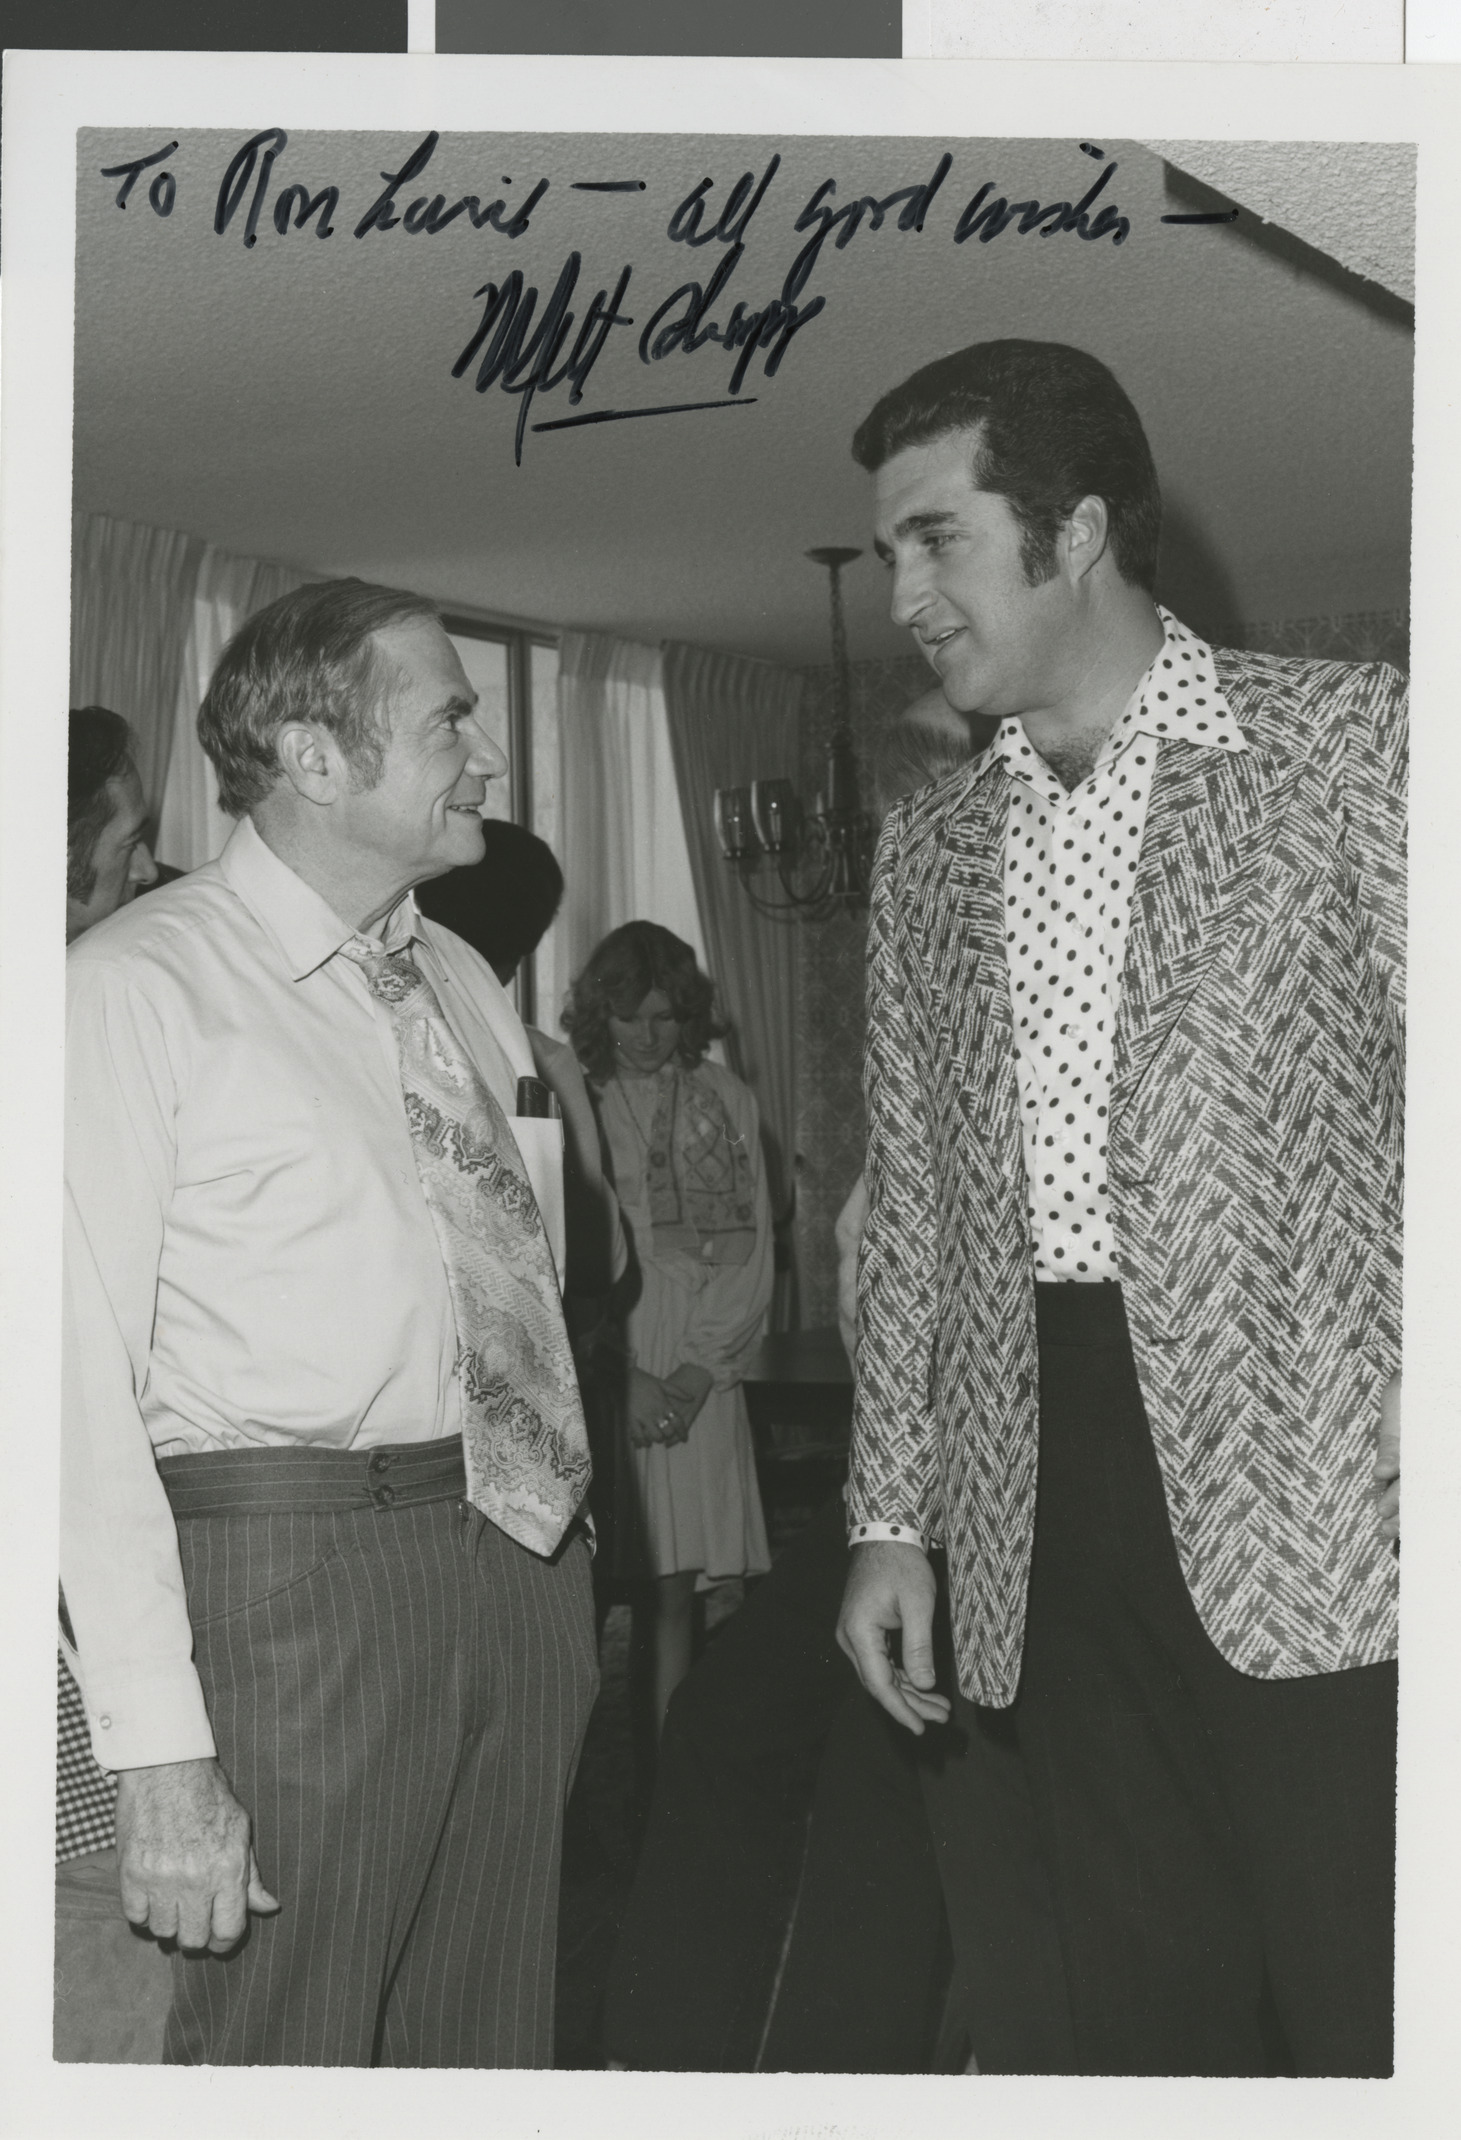 Photograph of Ron Lurie and unknown man (inscribed to Ron Lurie - All good wishes)